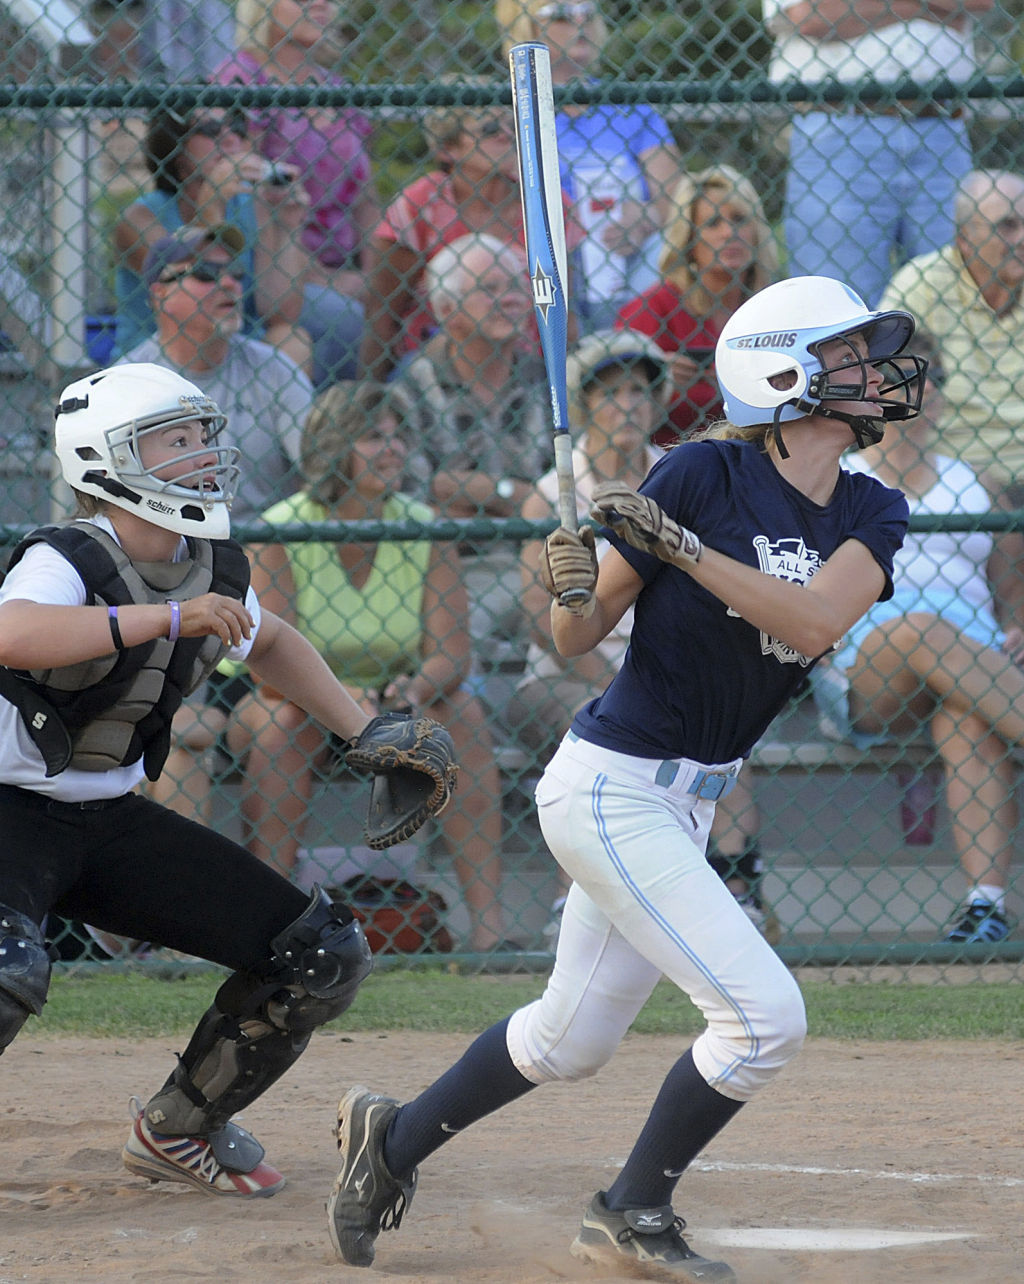 Secondever ASA All Star Games to showcase local softball talent